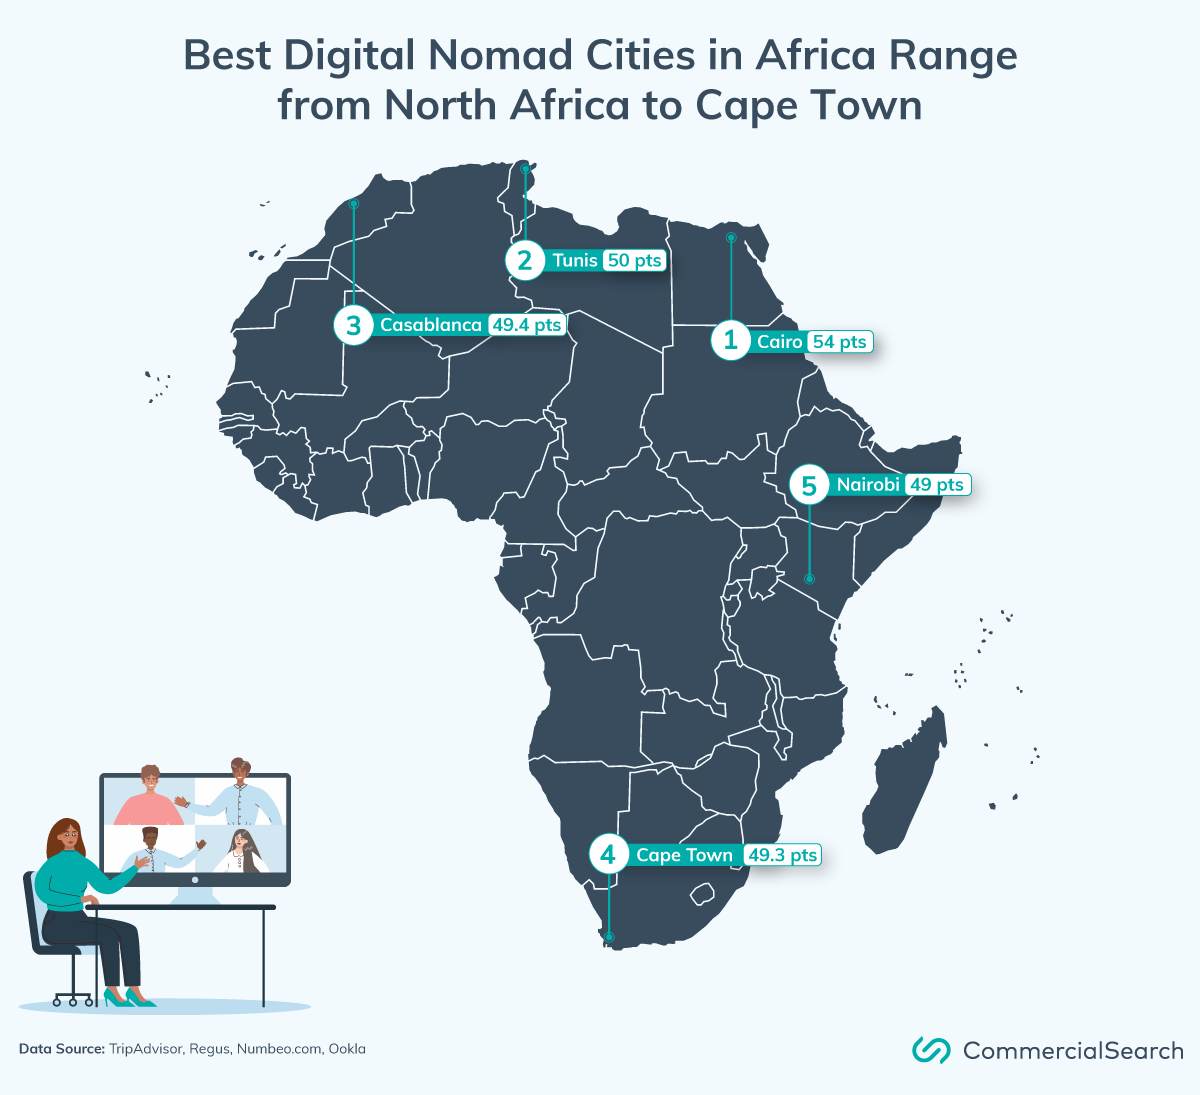 Best locations for digital nomads in Africa include Cairo, Tunis, Casablanca, Cape Town and Nairobi